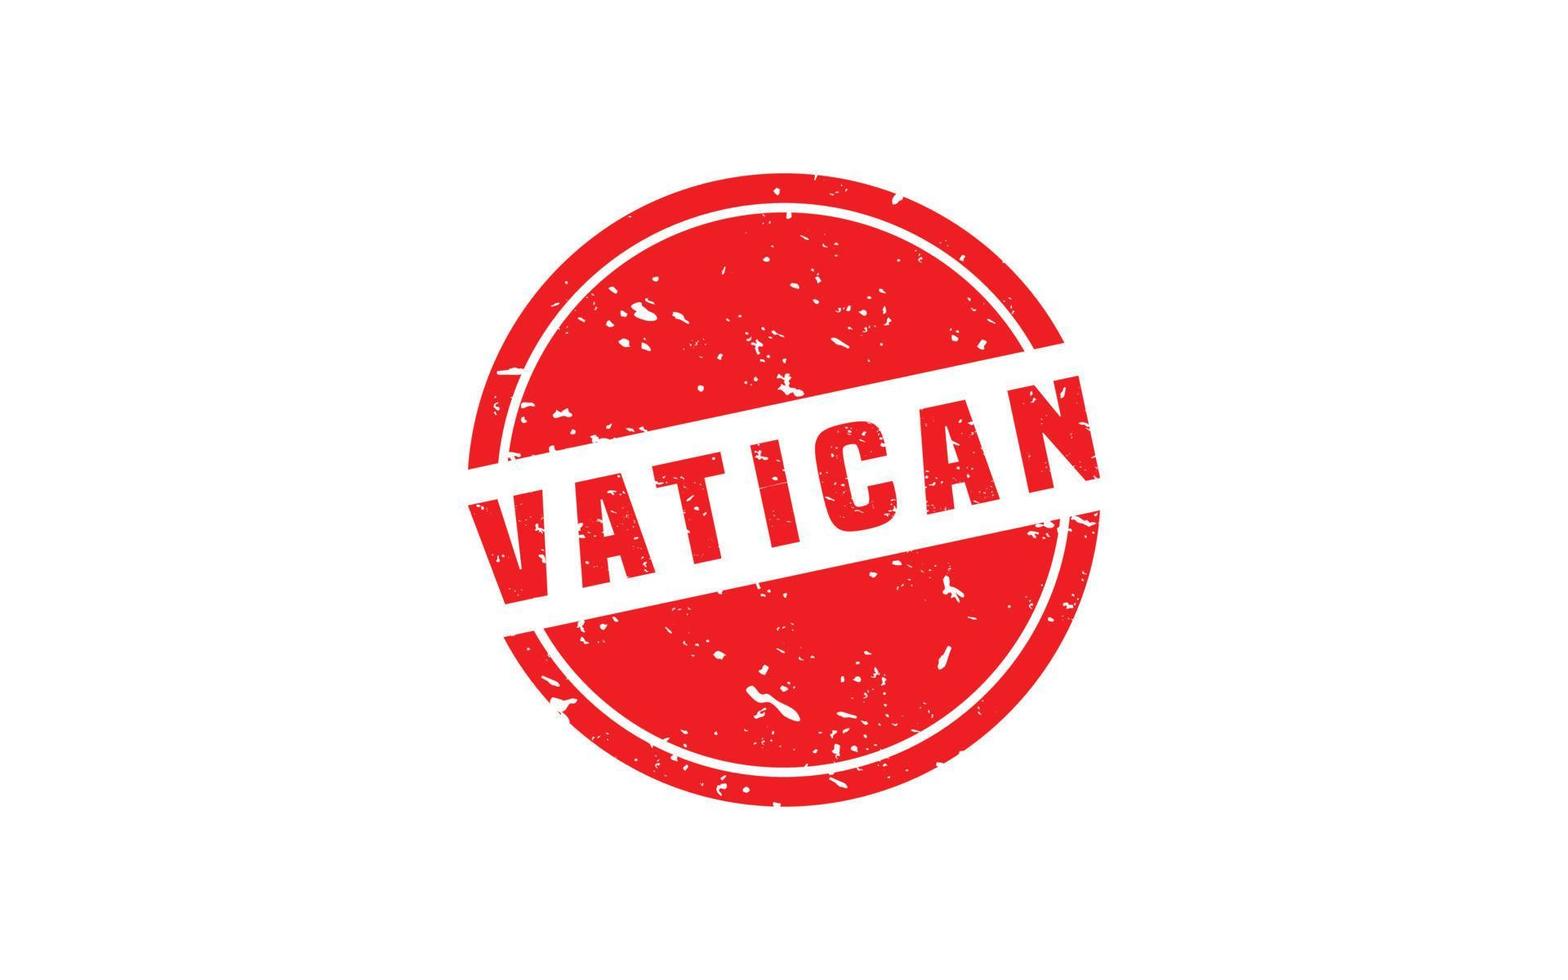 VATICAN rubber stamp with grunge style on white background vector